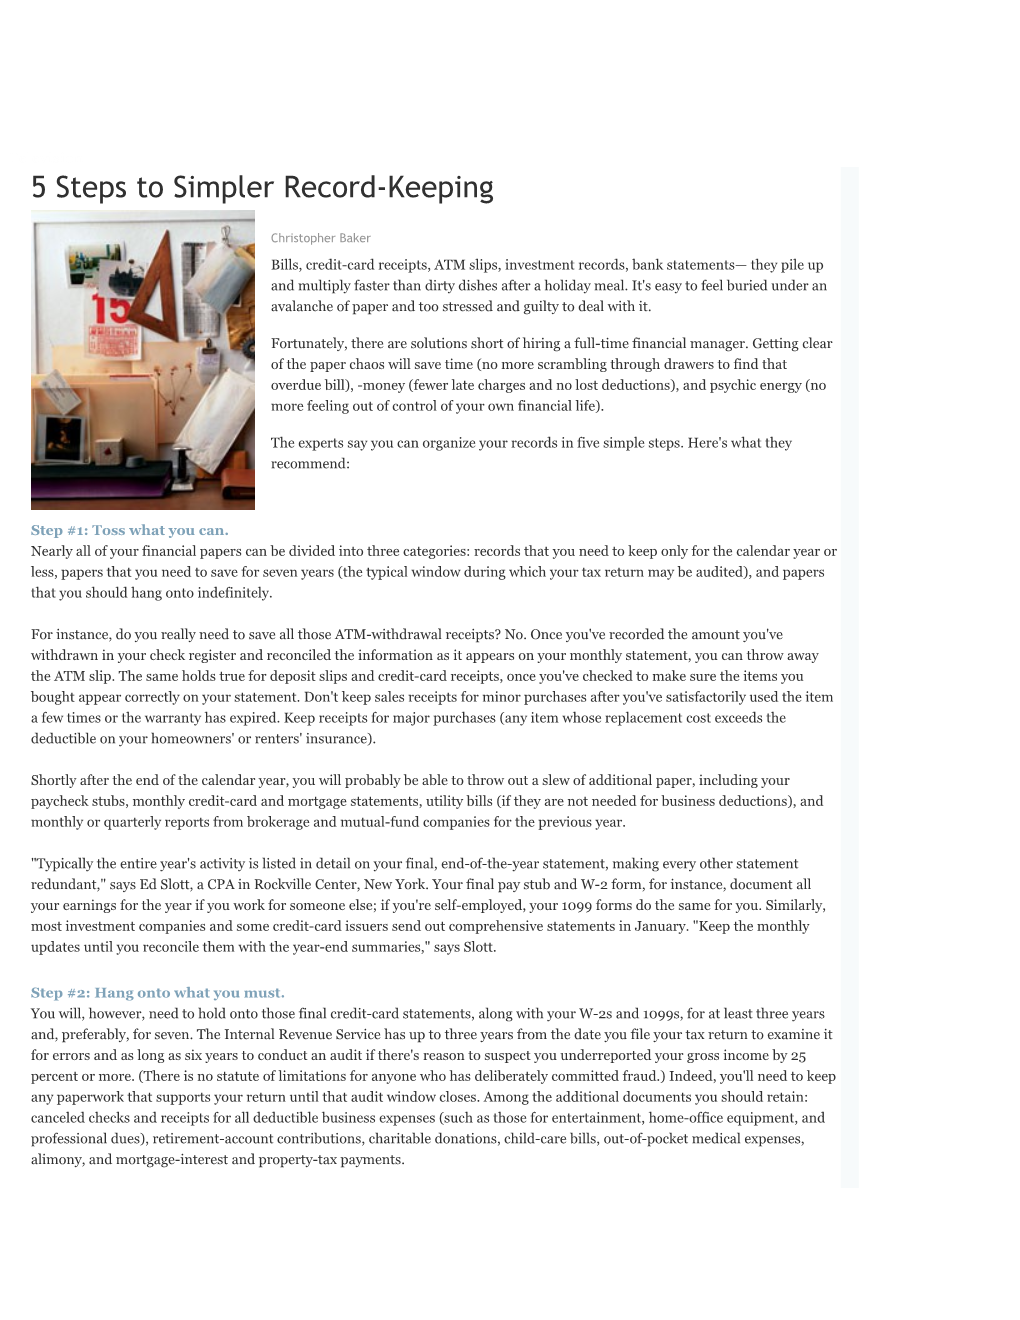 5 Steps to Simpler Record-Keeping